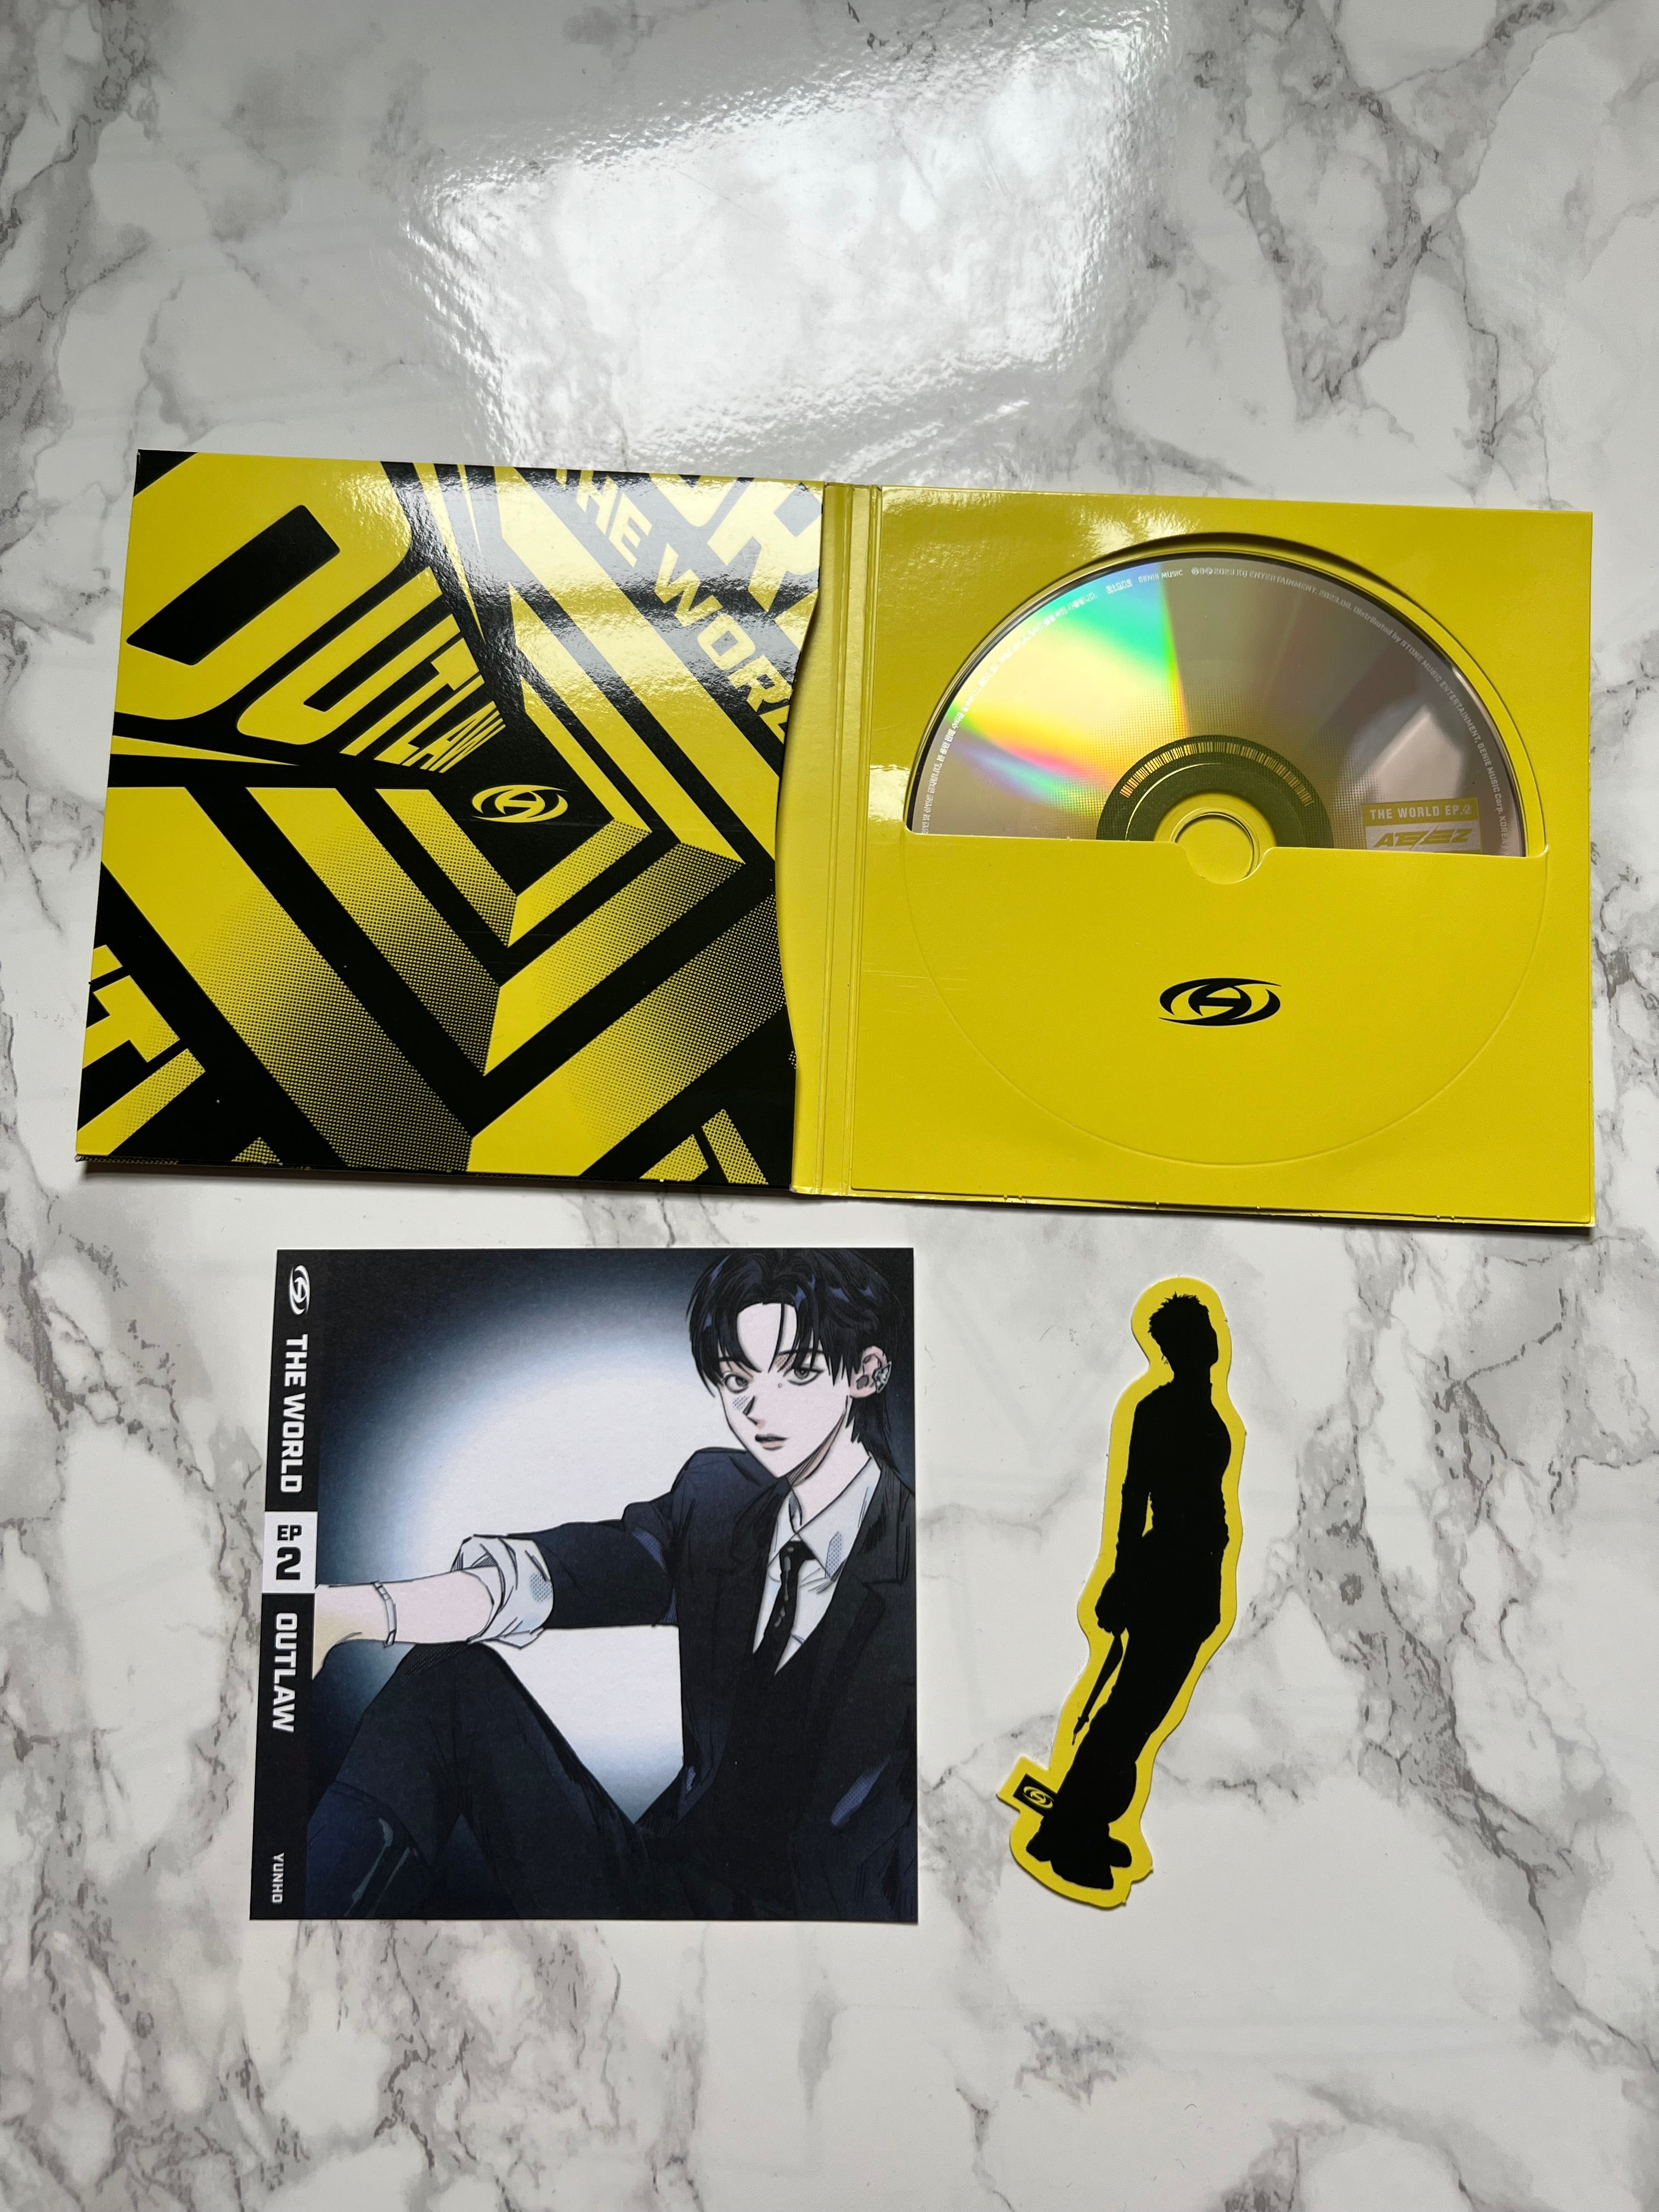 Ateez 'The World Ep. 2: Outlaw' Album (includes SIGNED)